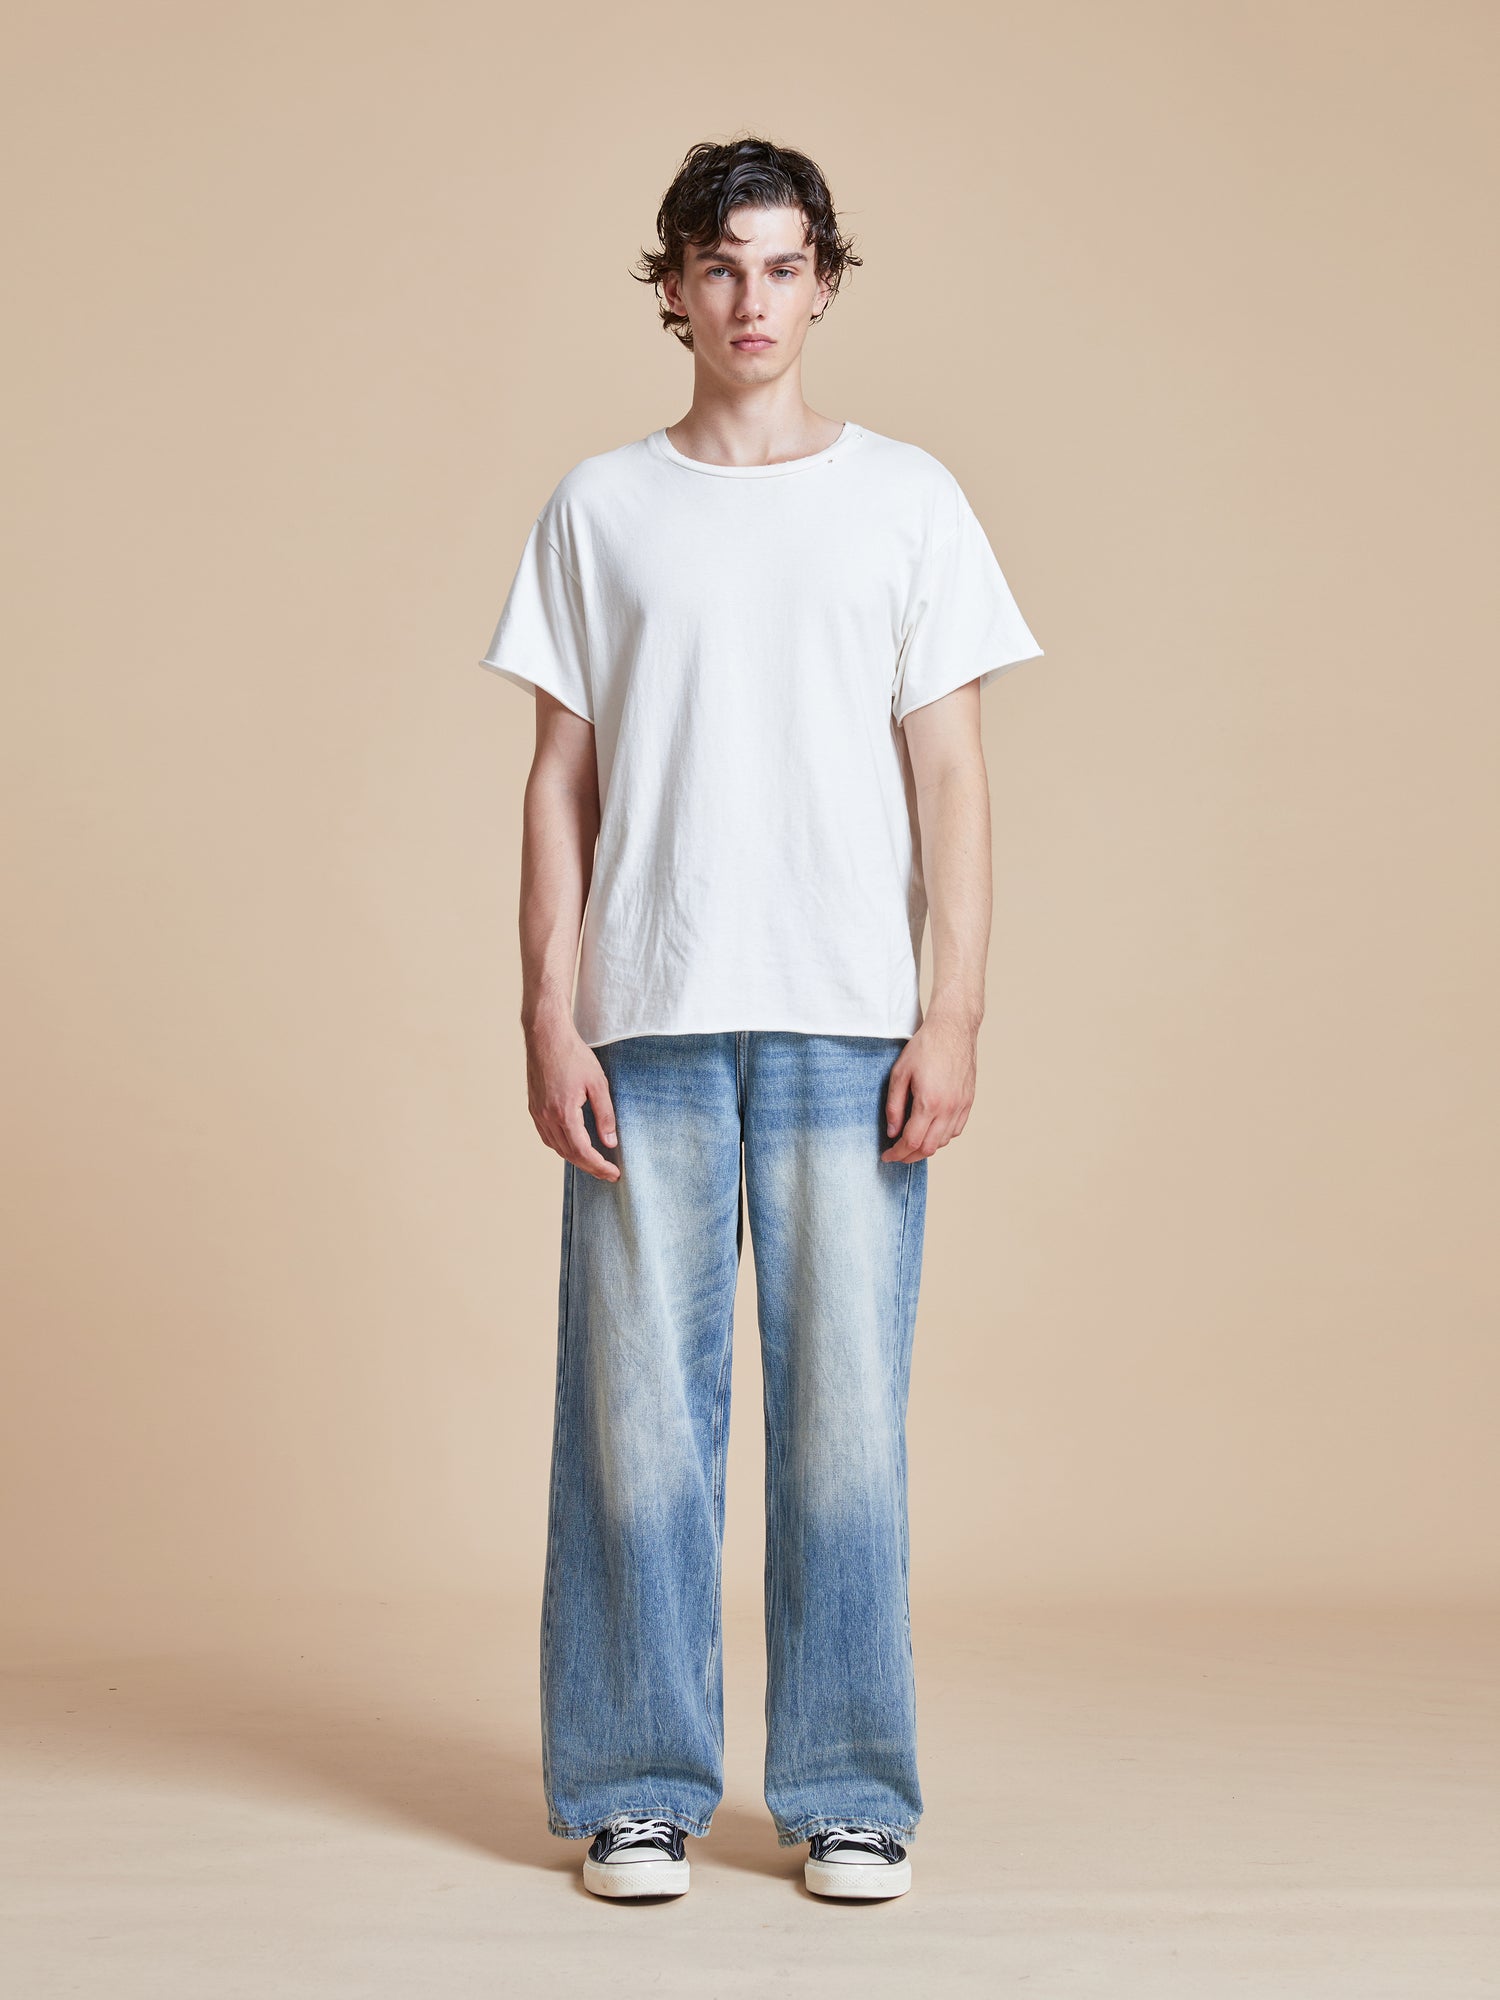 A man wearing a white t-shirt and Found's Lacy Baggy Jeans Blue.